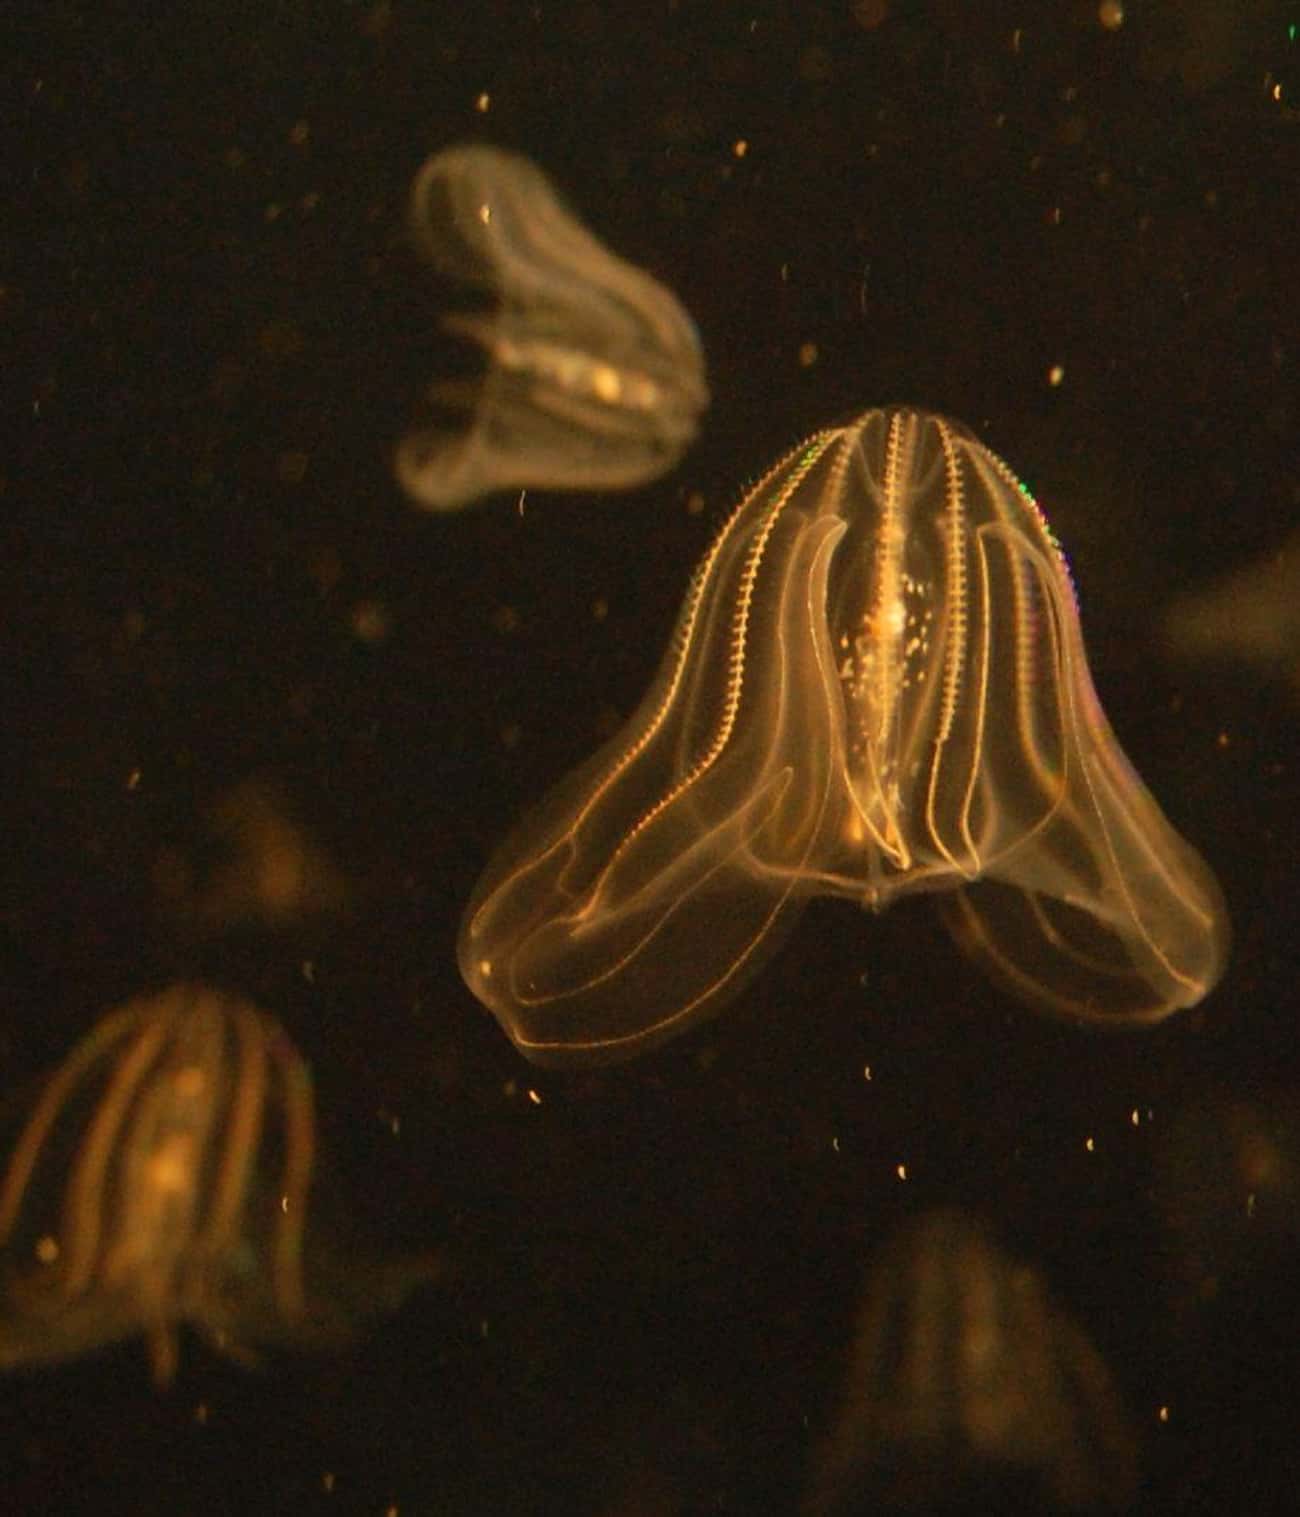 Comb Jellyfish Can Tell Direction Without Having Eyes